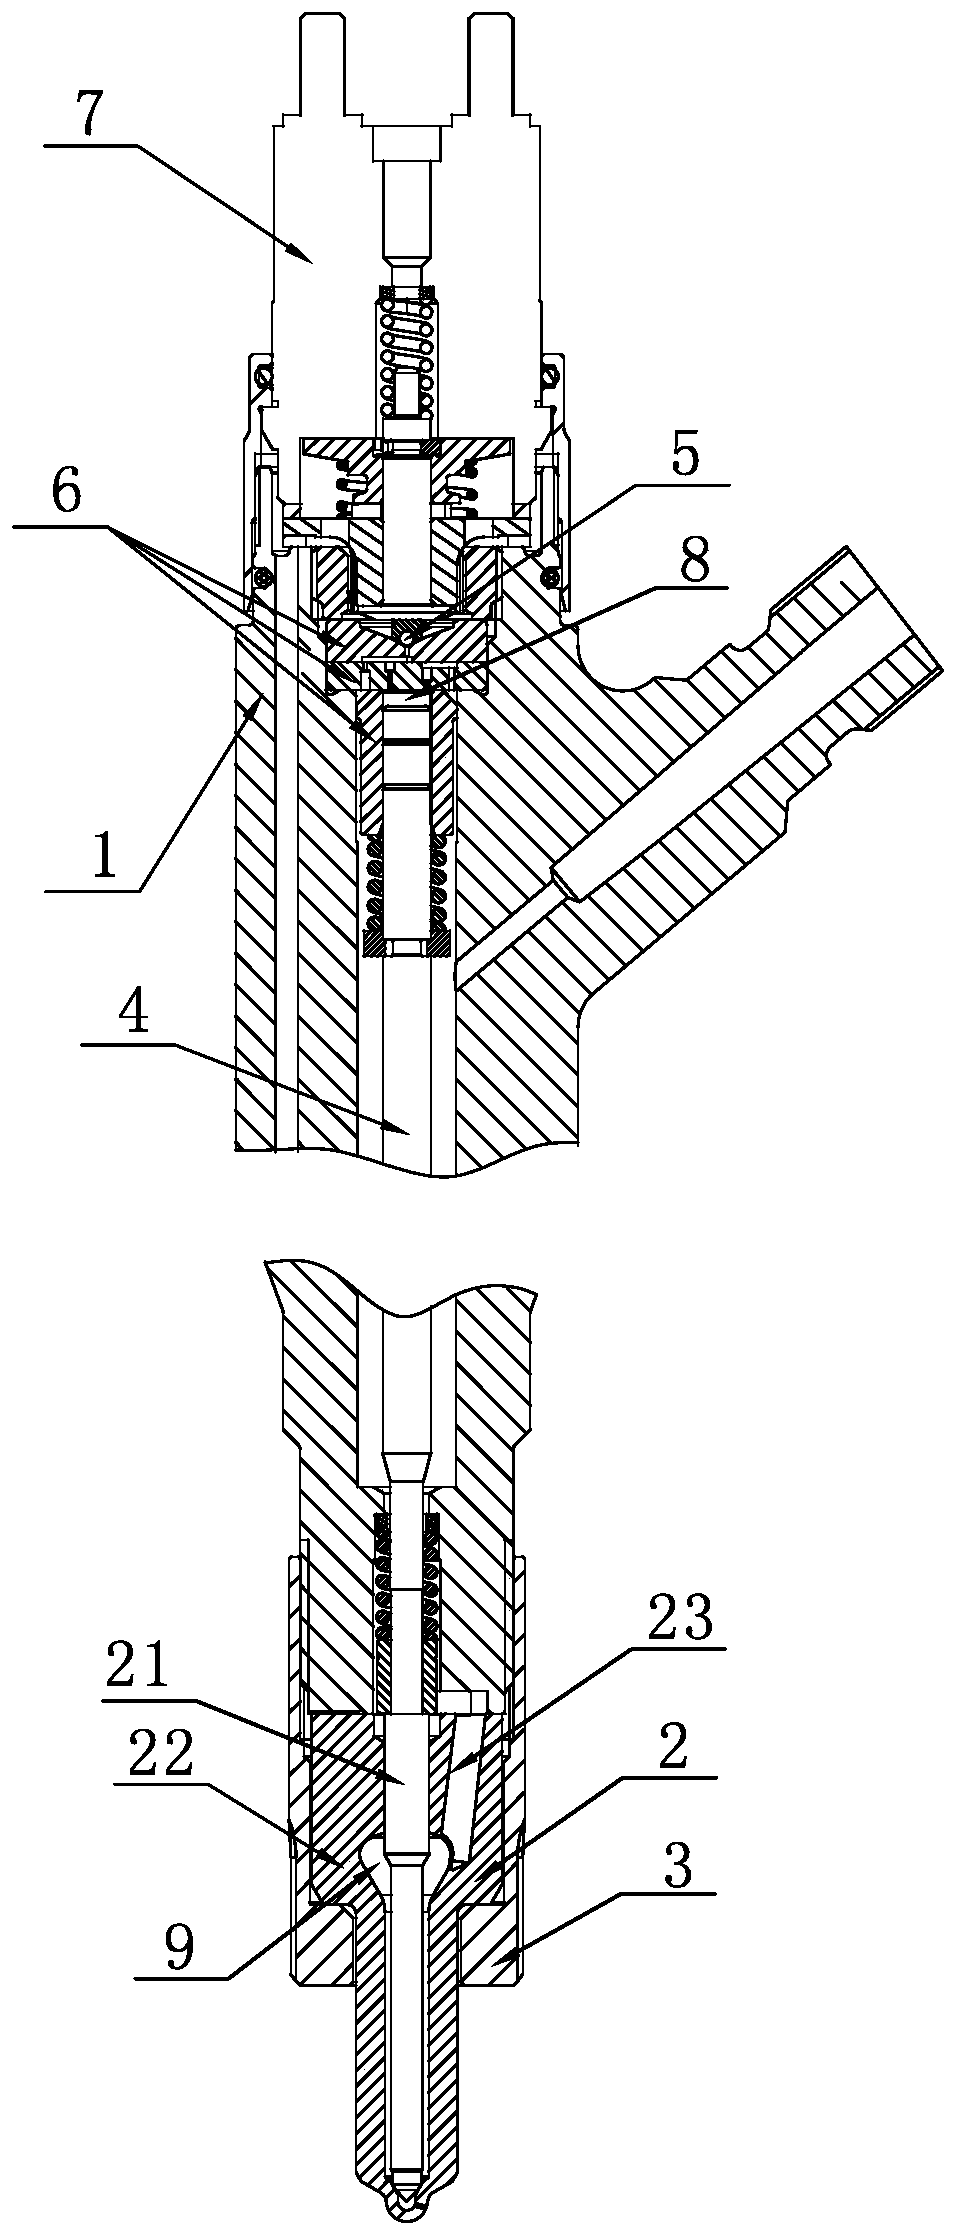 High-power-density high-pressure common rail fuel injector